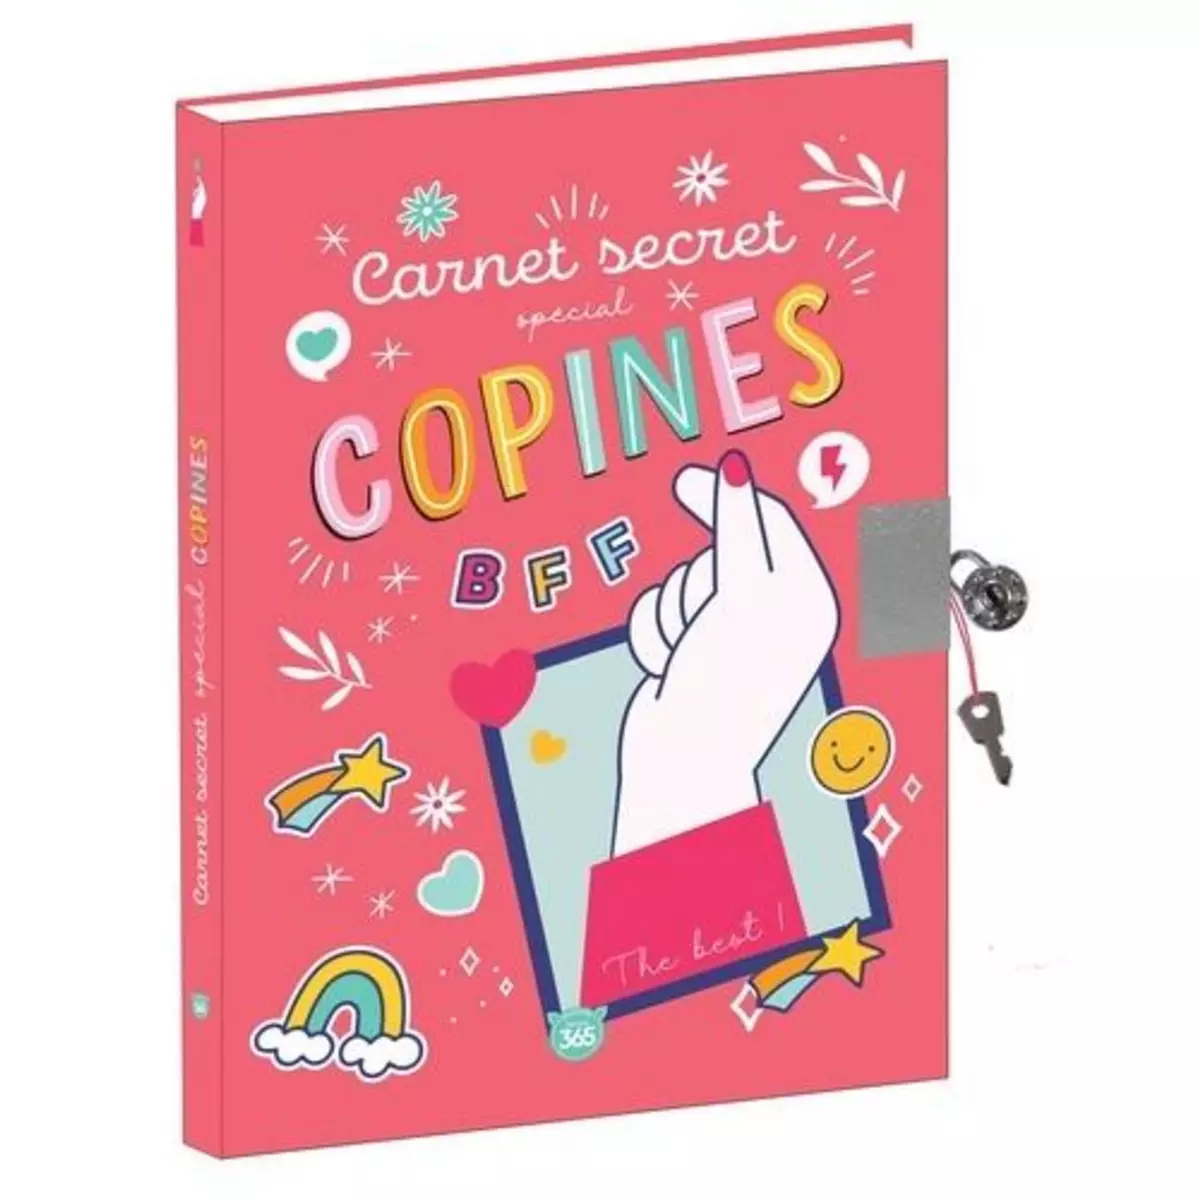  CARNET SECRET SPECIAL COPINES BFF, Editions 365